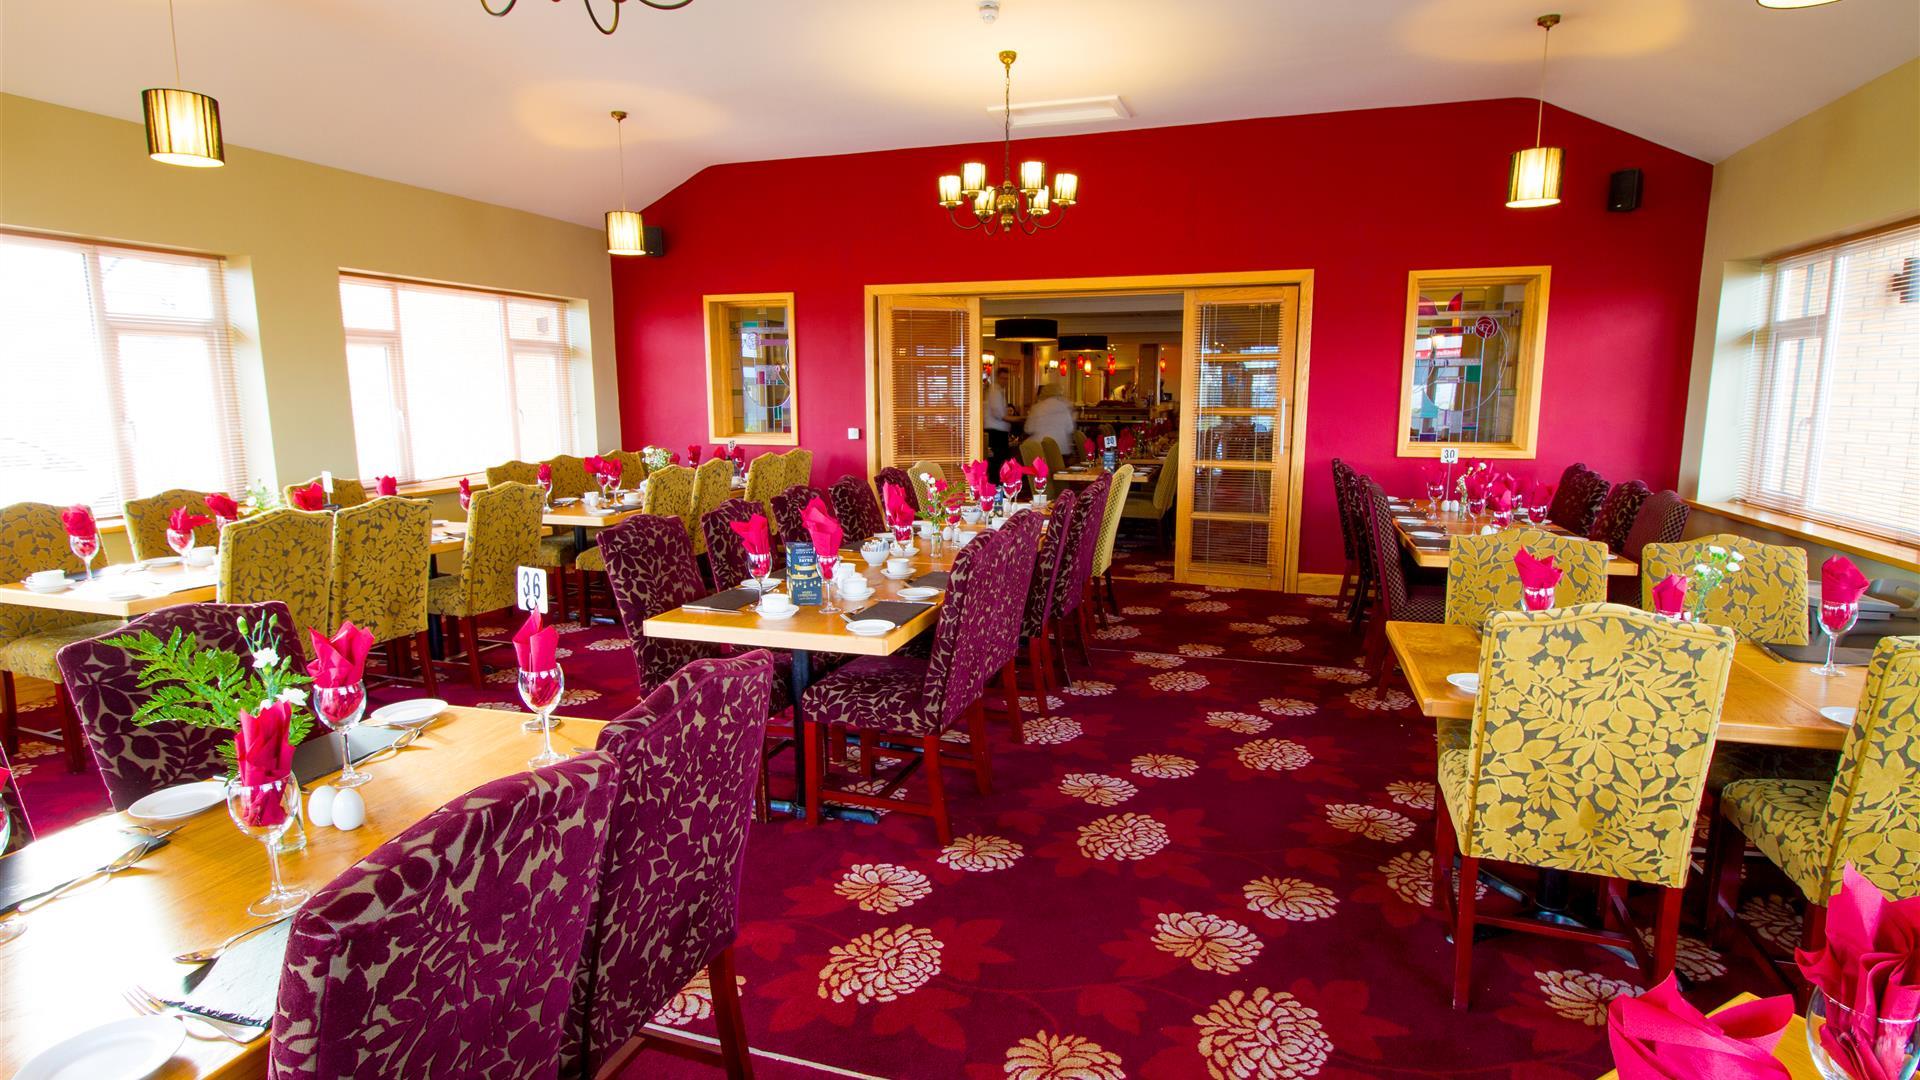 Dining area within Curran Court Hotel restaurant with a purple and pink decor.